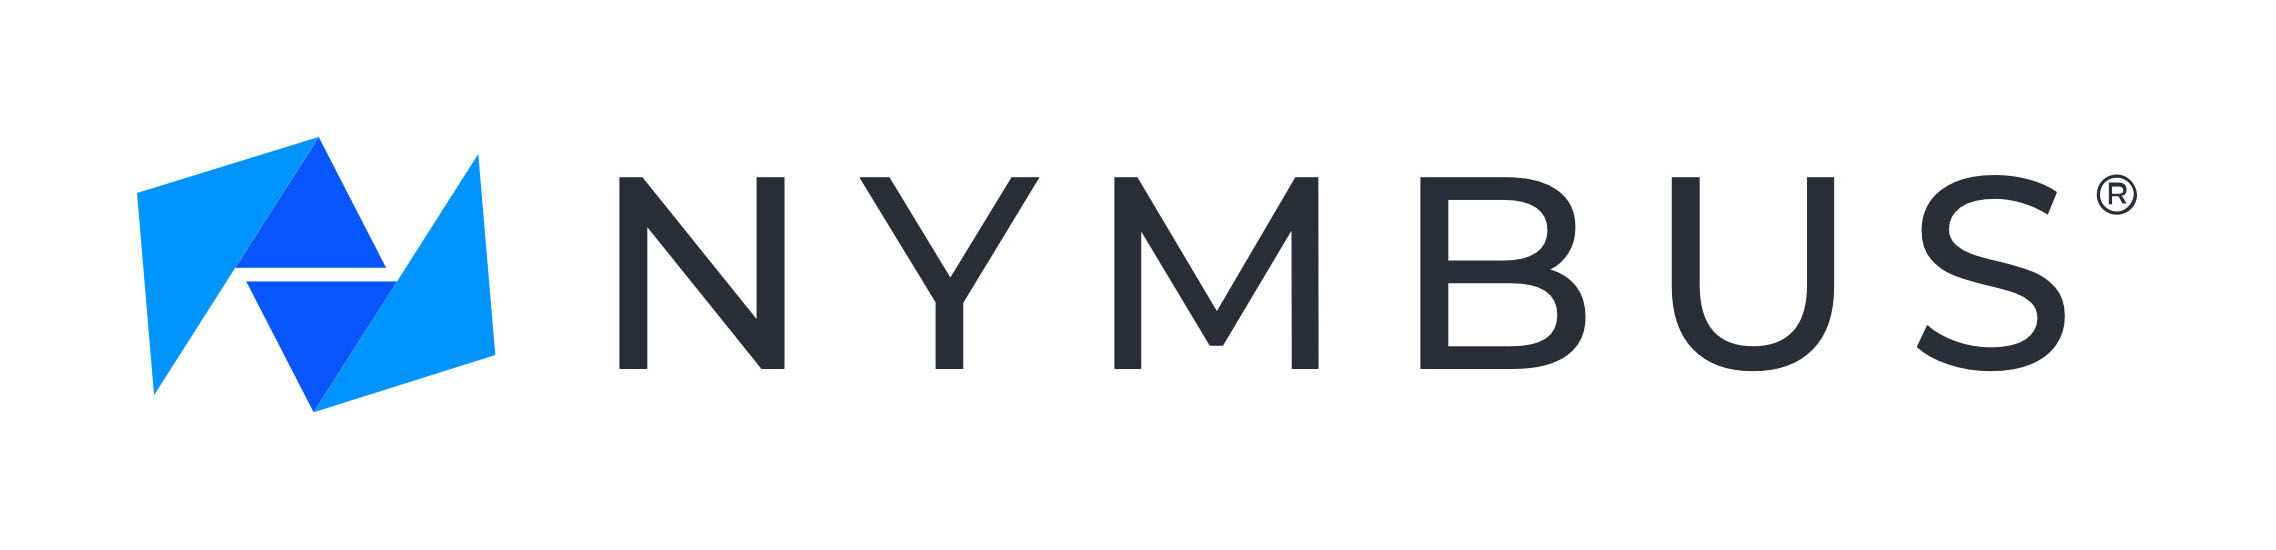 picture of Nymbus logo